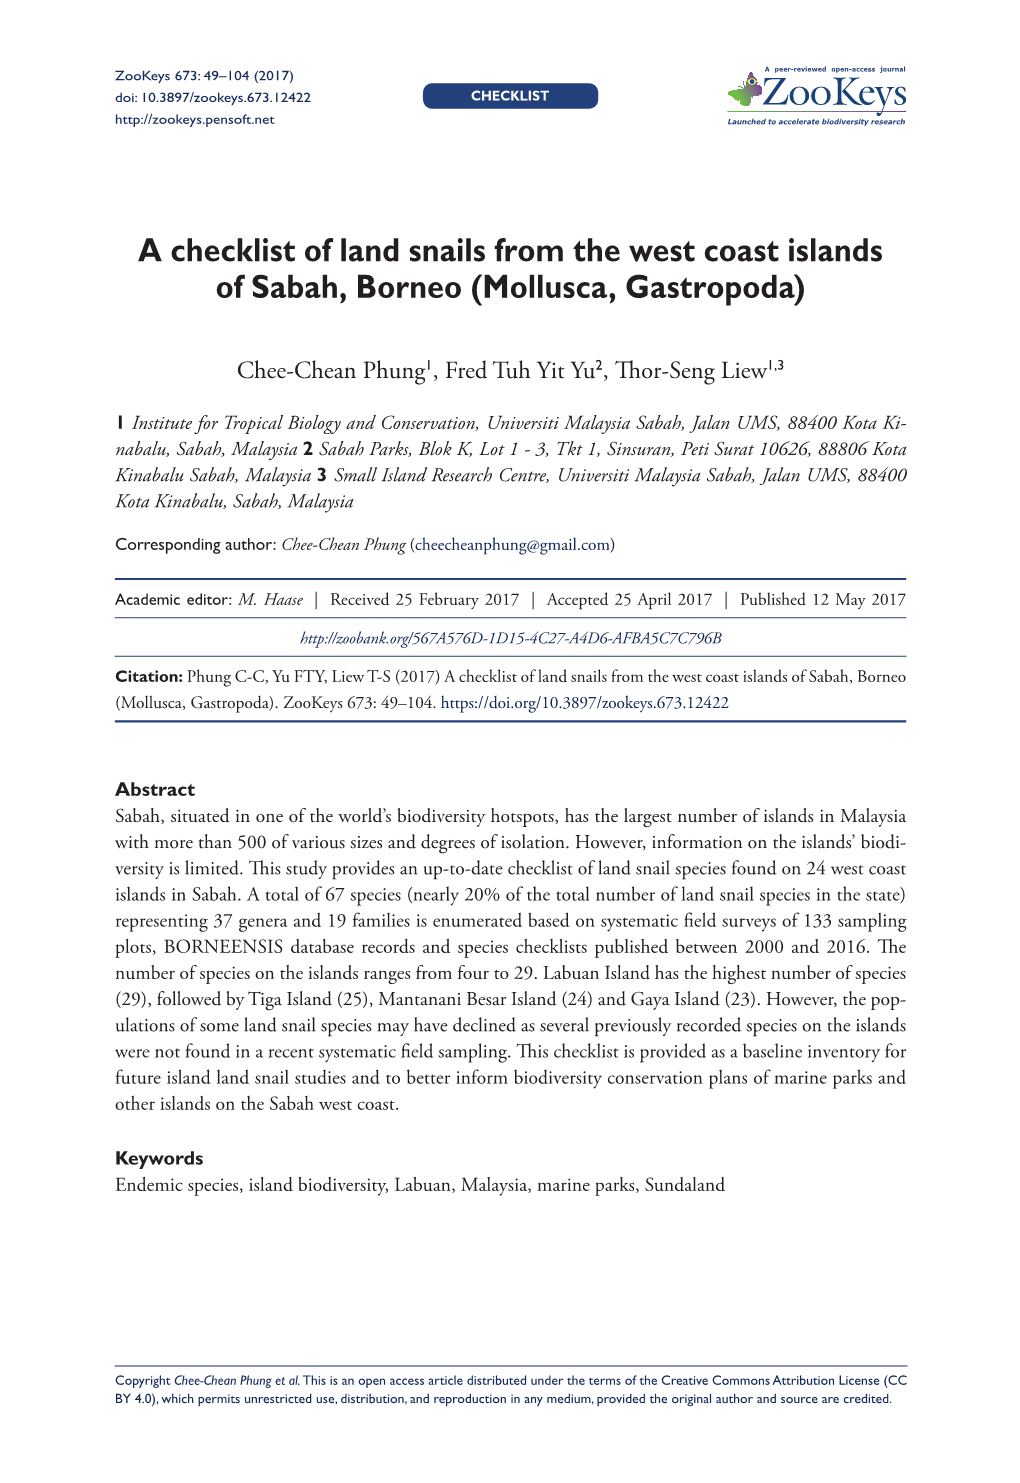 A Checklist of Land Snails from the West Coast Islands of Sabah, Borneo (Mollusca, Gastropoda)